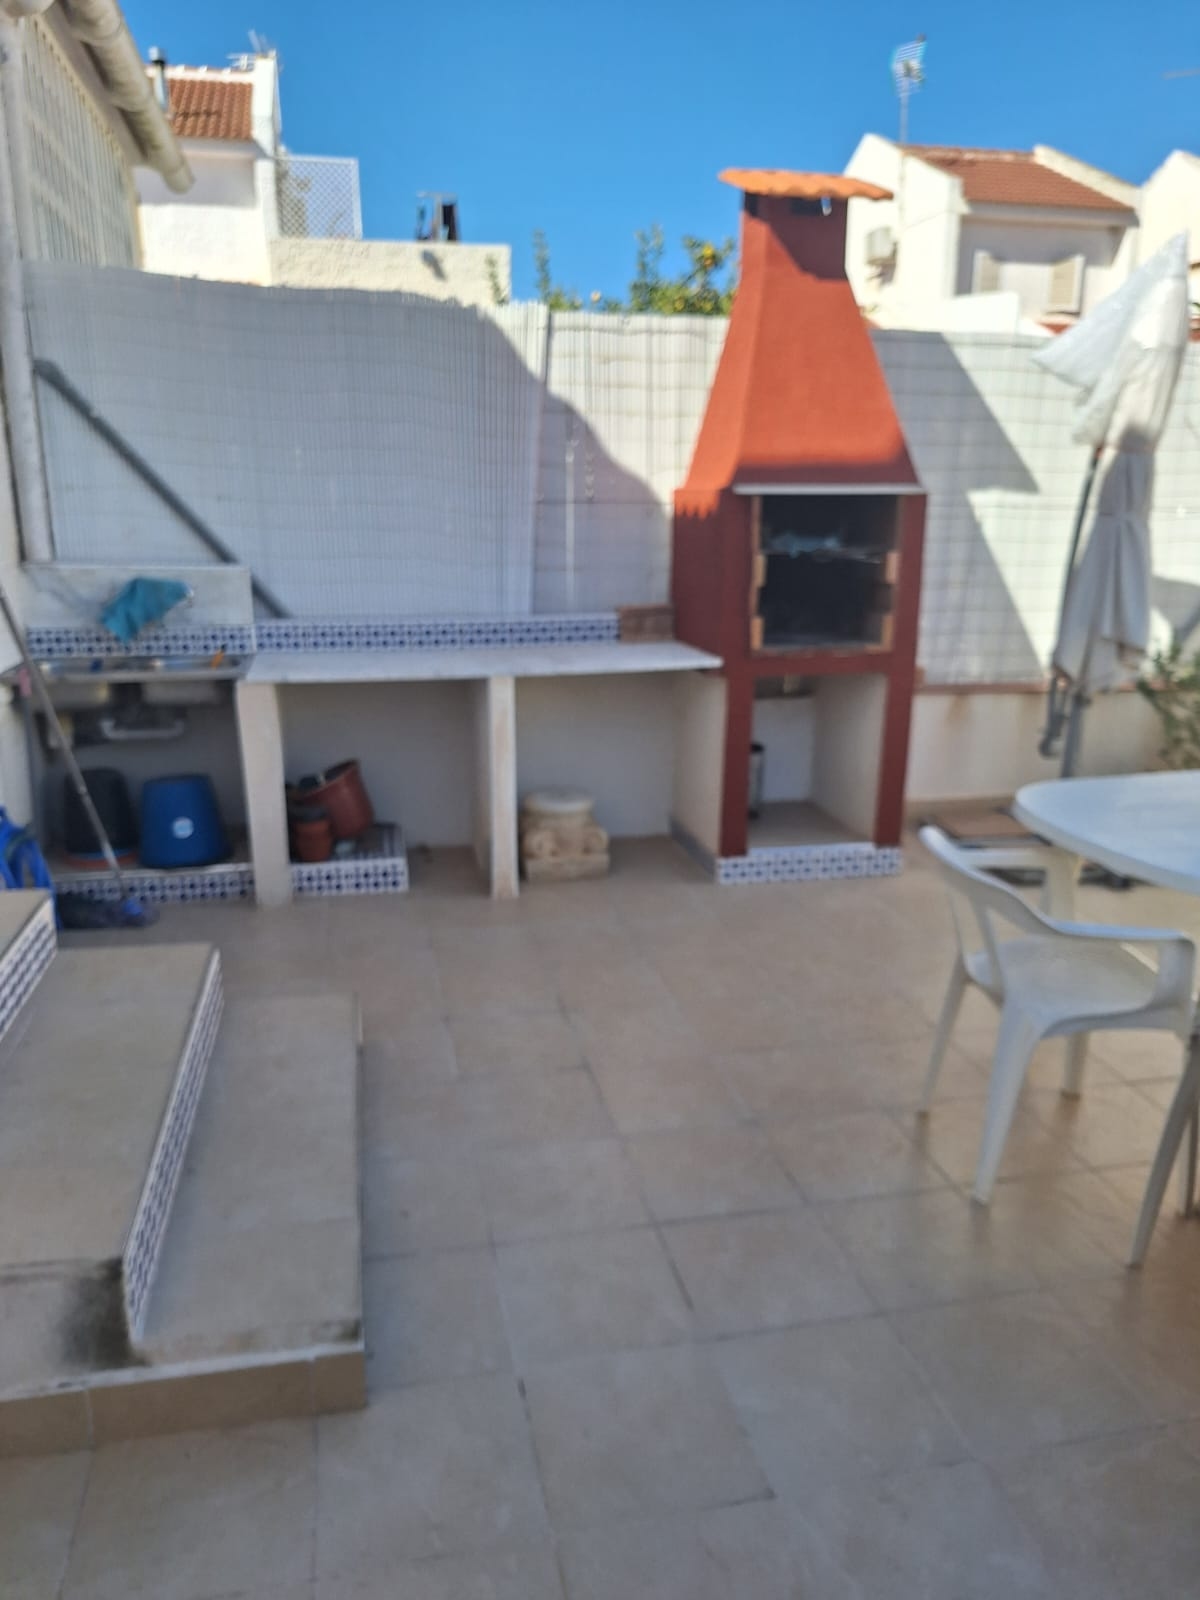 SEMI-DETACHED DUPLEX BUNGALOW 700 METERS FROM THE BEACH IN CALAS BLANCAS